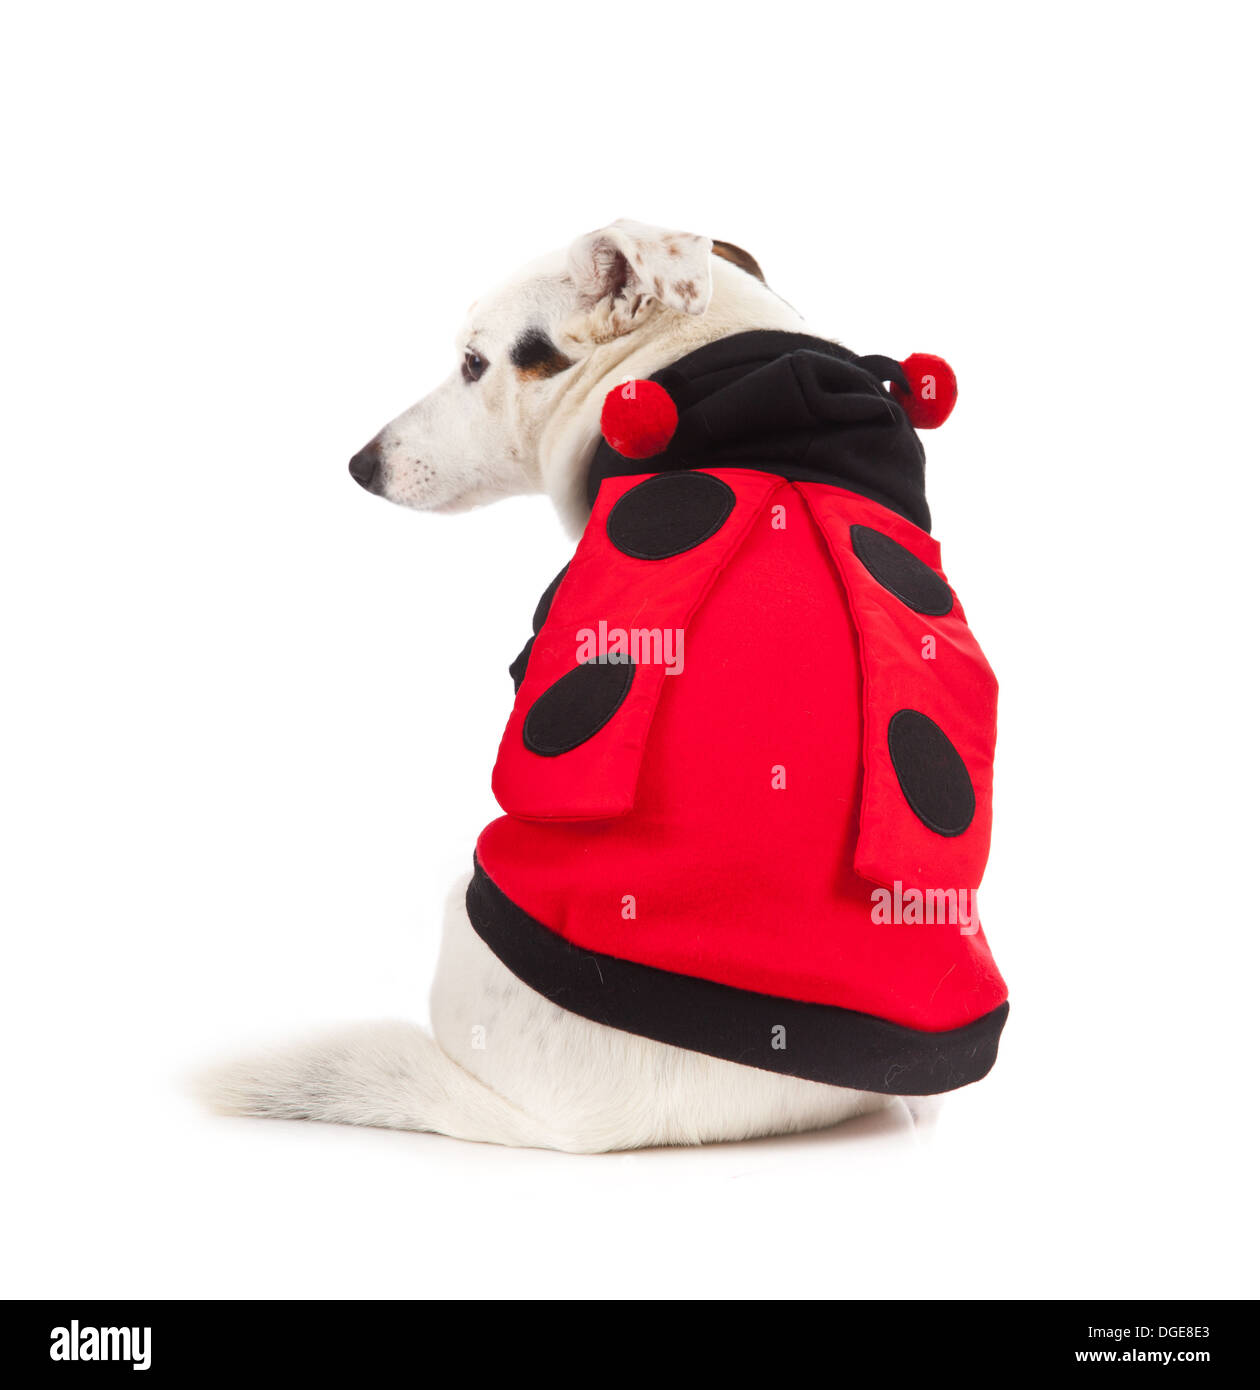 Jack Russell dressed up as a ladybug on white background Stock Photo